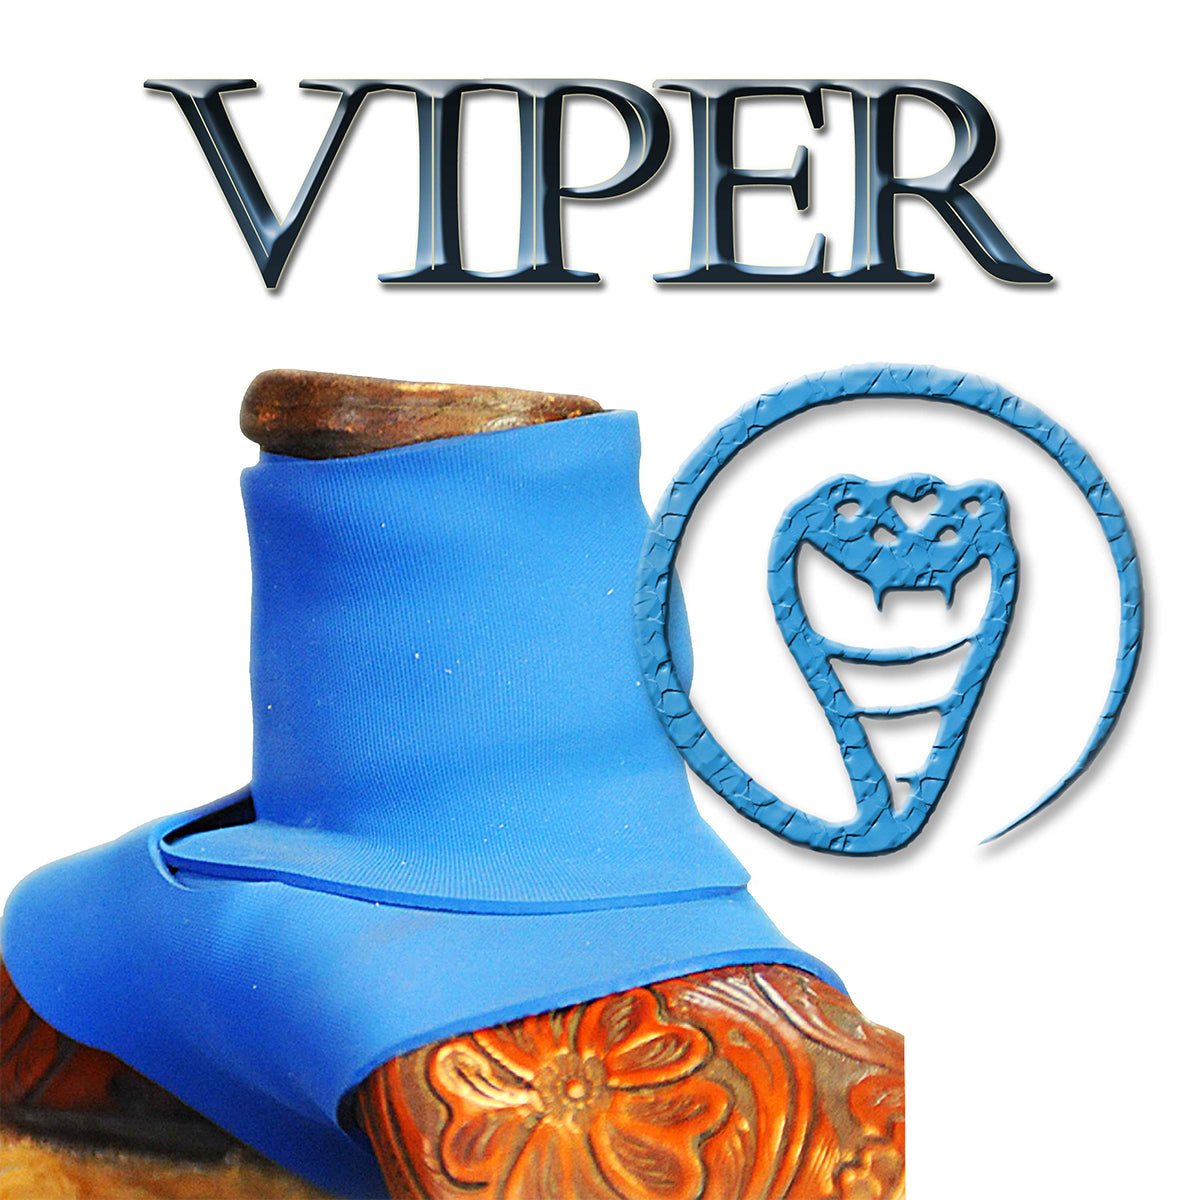 Blue Viper Dally Wrap by Ropesmart